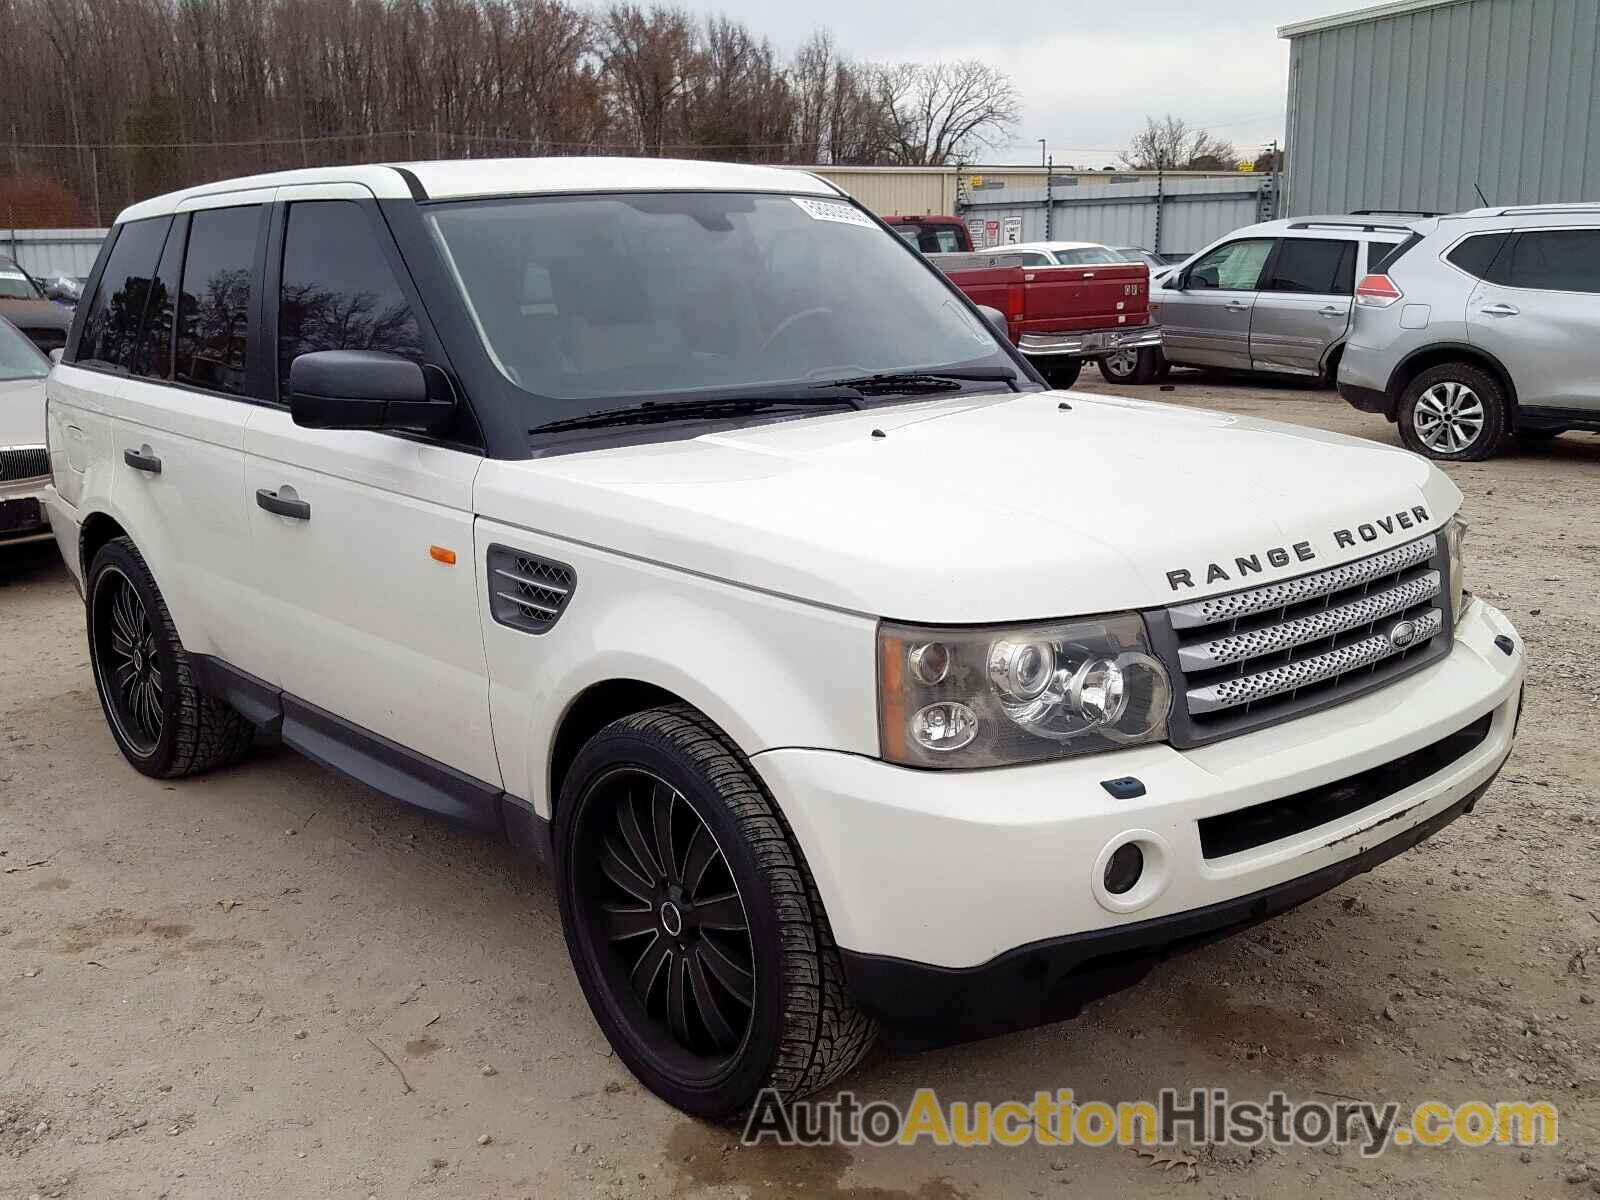 2006 LAND ROVER RANGE ROVE SUPERCHARGED, SALSH23446A980663